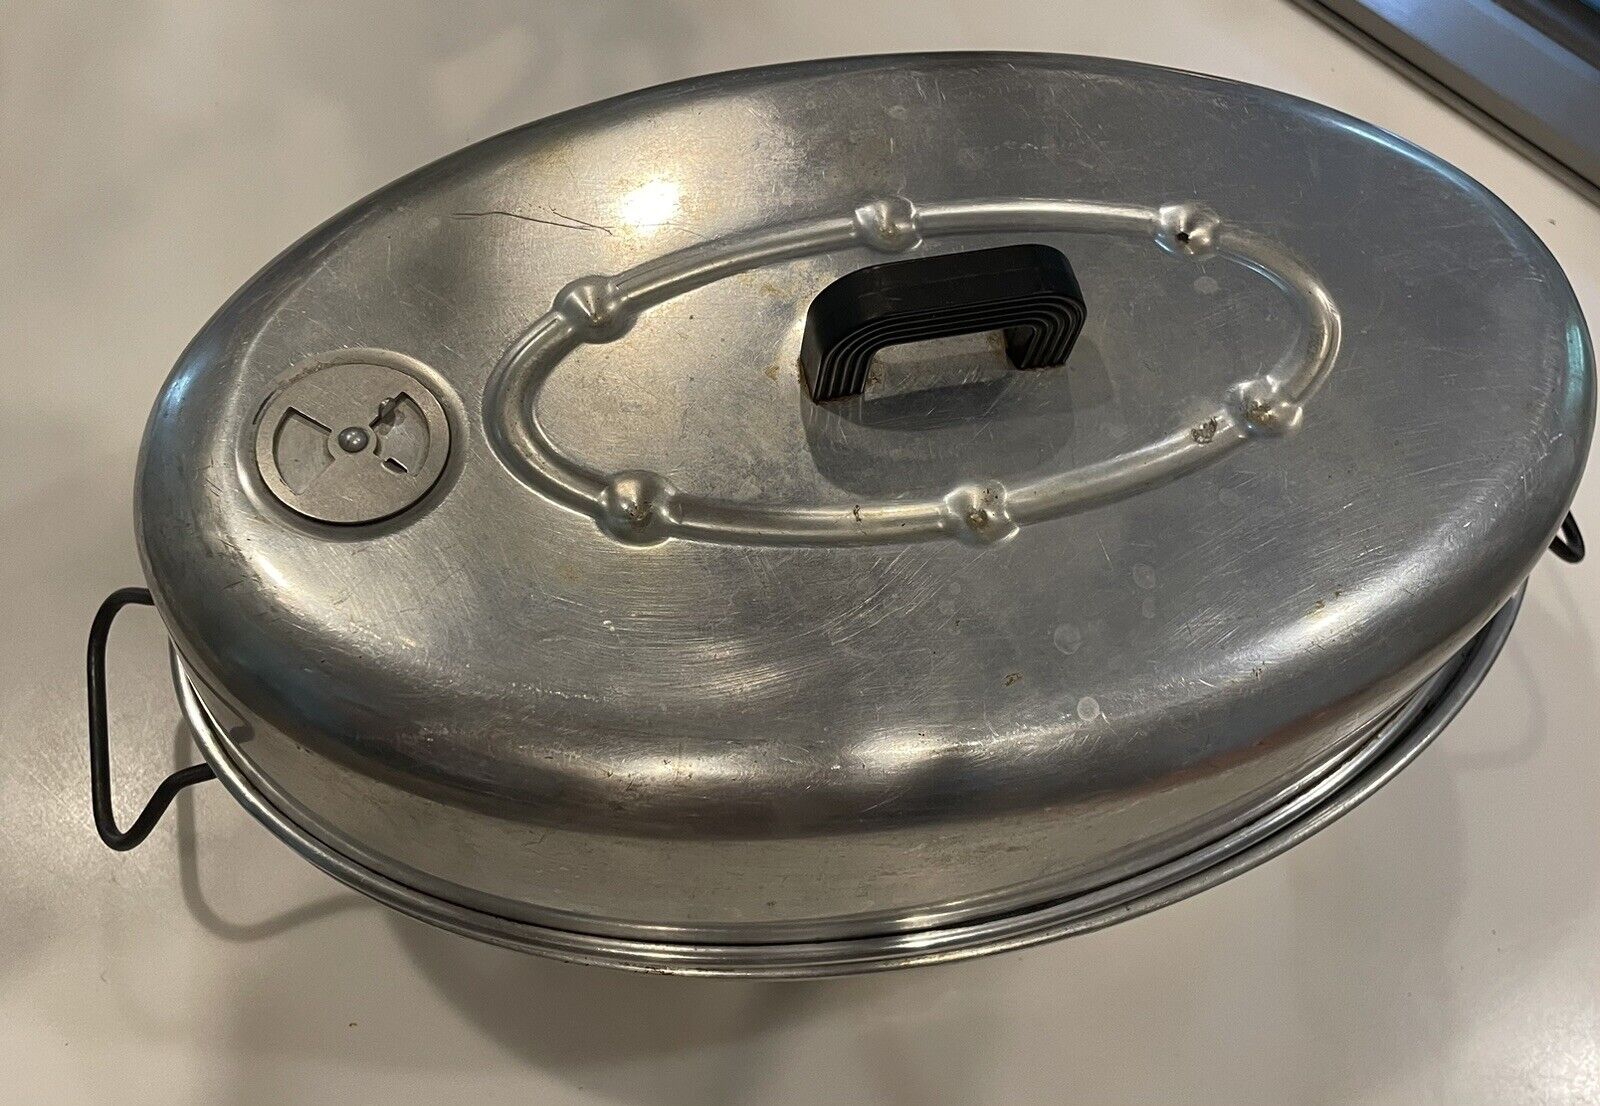 Vintage WEAR-EVER #5024 Aluminum Oval Roasting Pan 3 pc. - Vented Lid - Tray